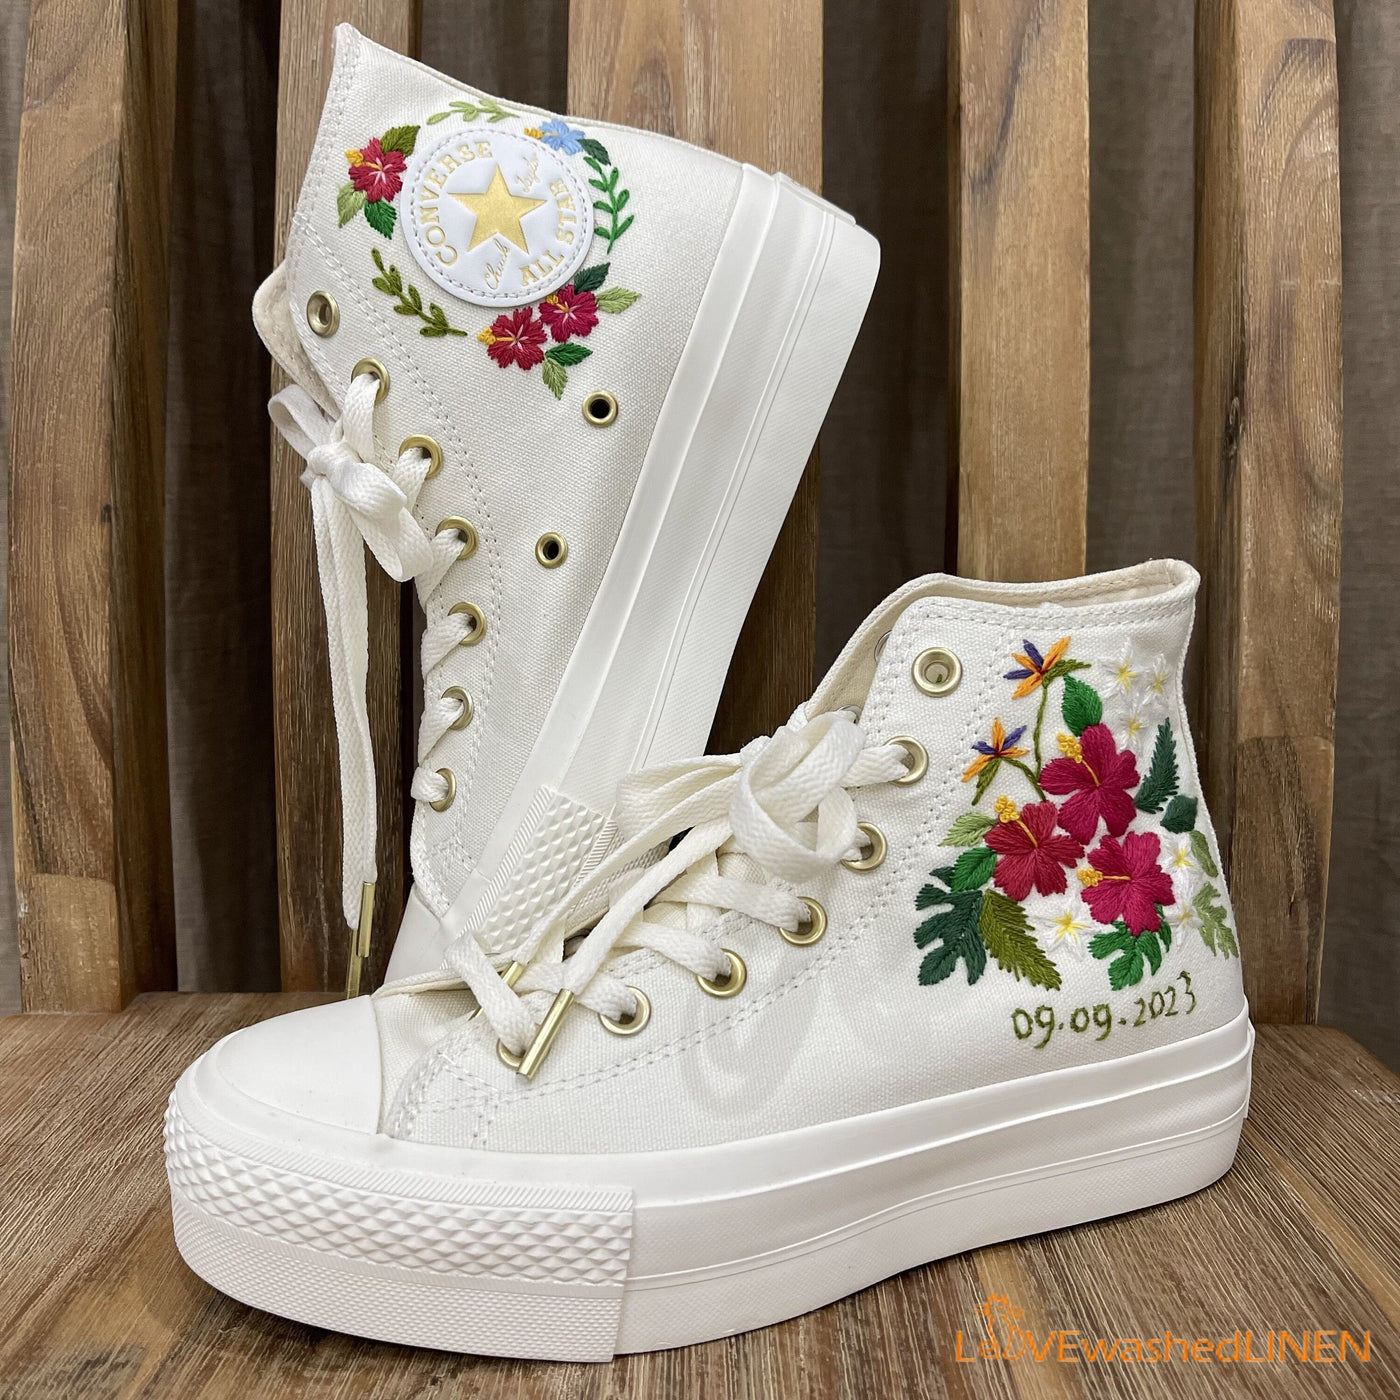 Custom Coverse Platform Wedding Flowers Embroidered Converse Tropical